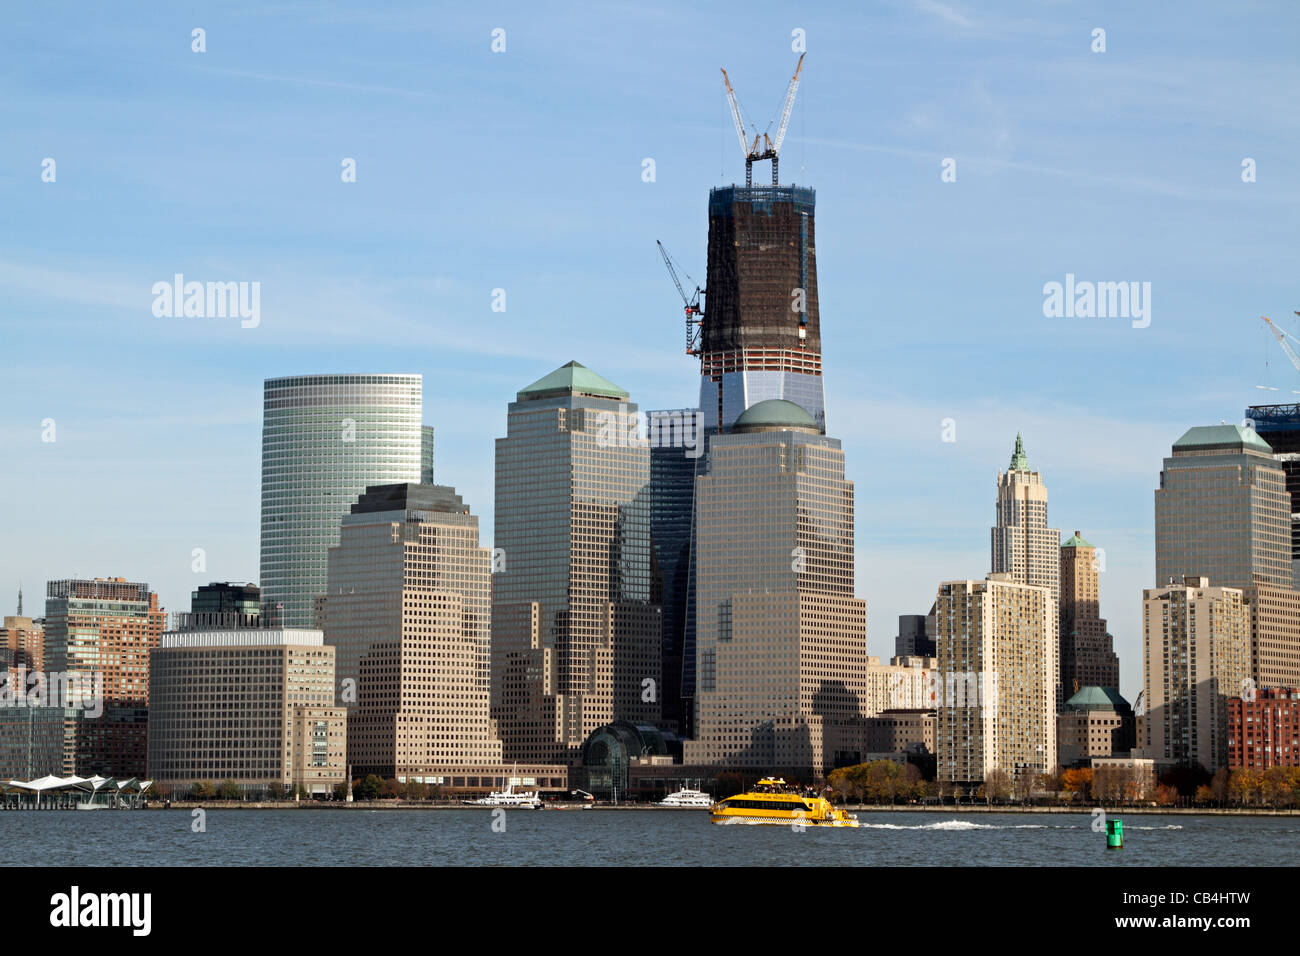 The Freedom Tower under construction and rising from Ground Zero, the scene of the 9/11 terrorist attack. Stock Photo